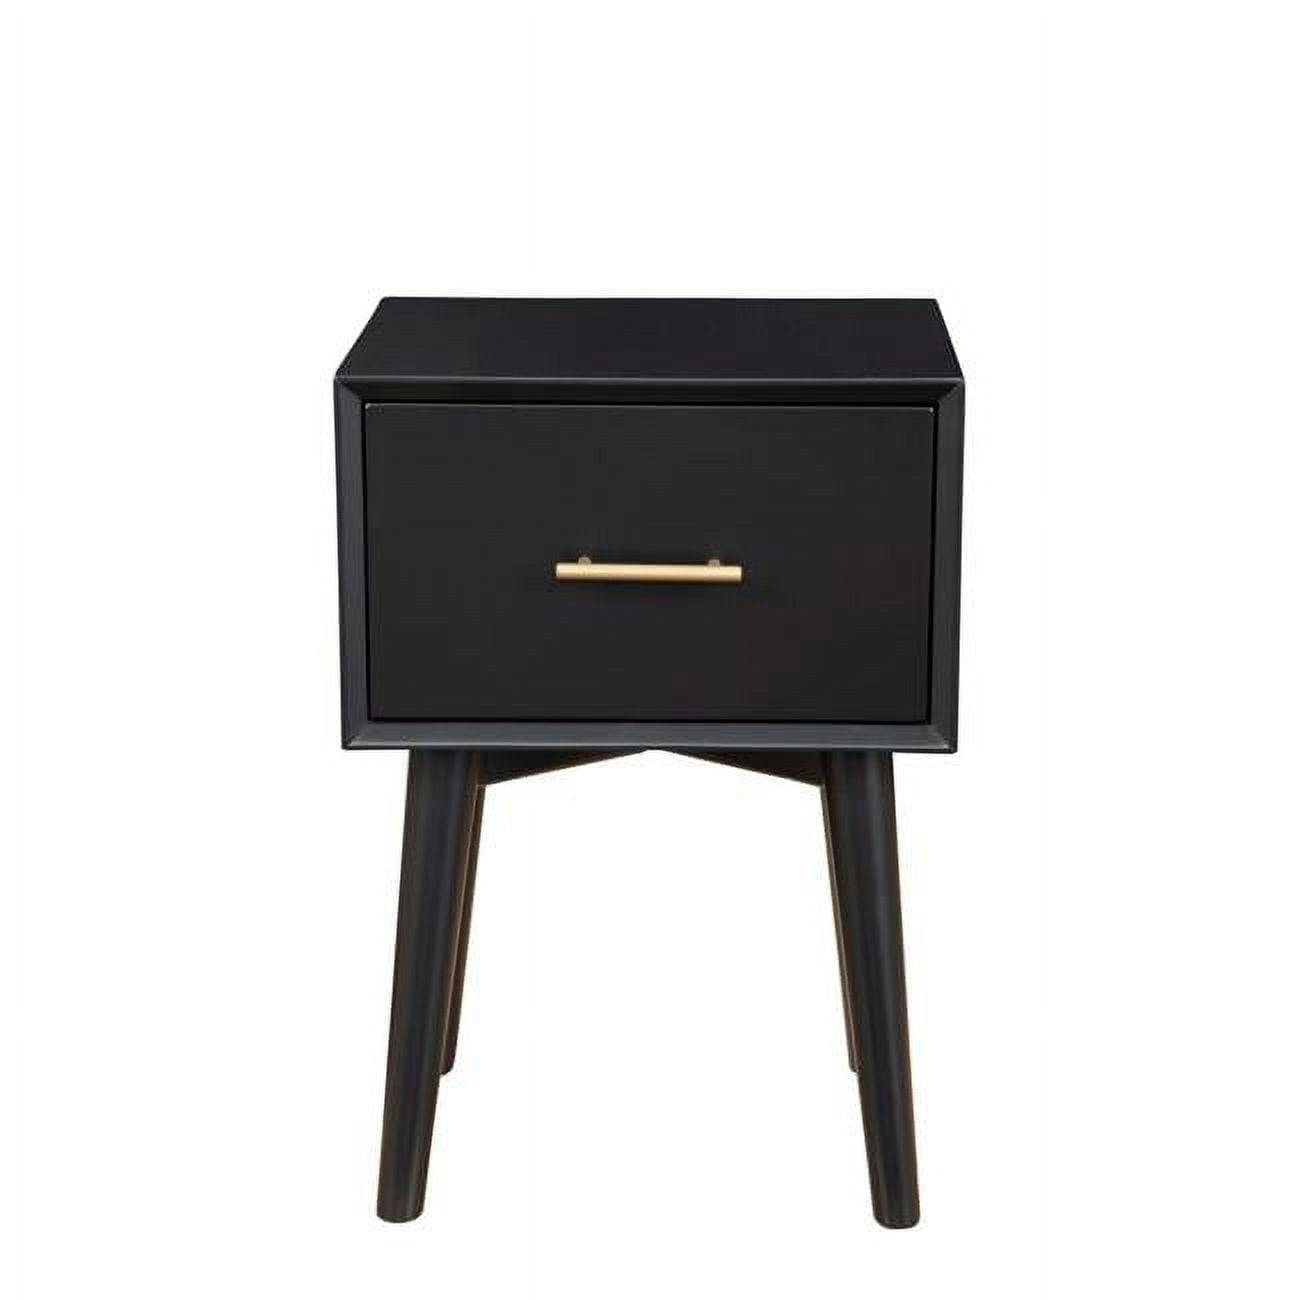 Flynn Black Mahogany Wood and Metal Rectangular End Table with Storage